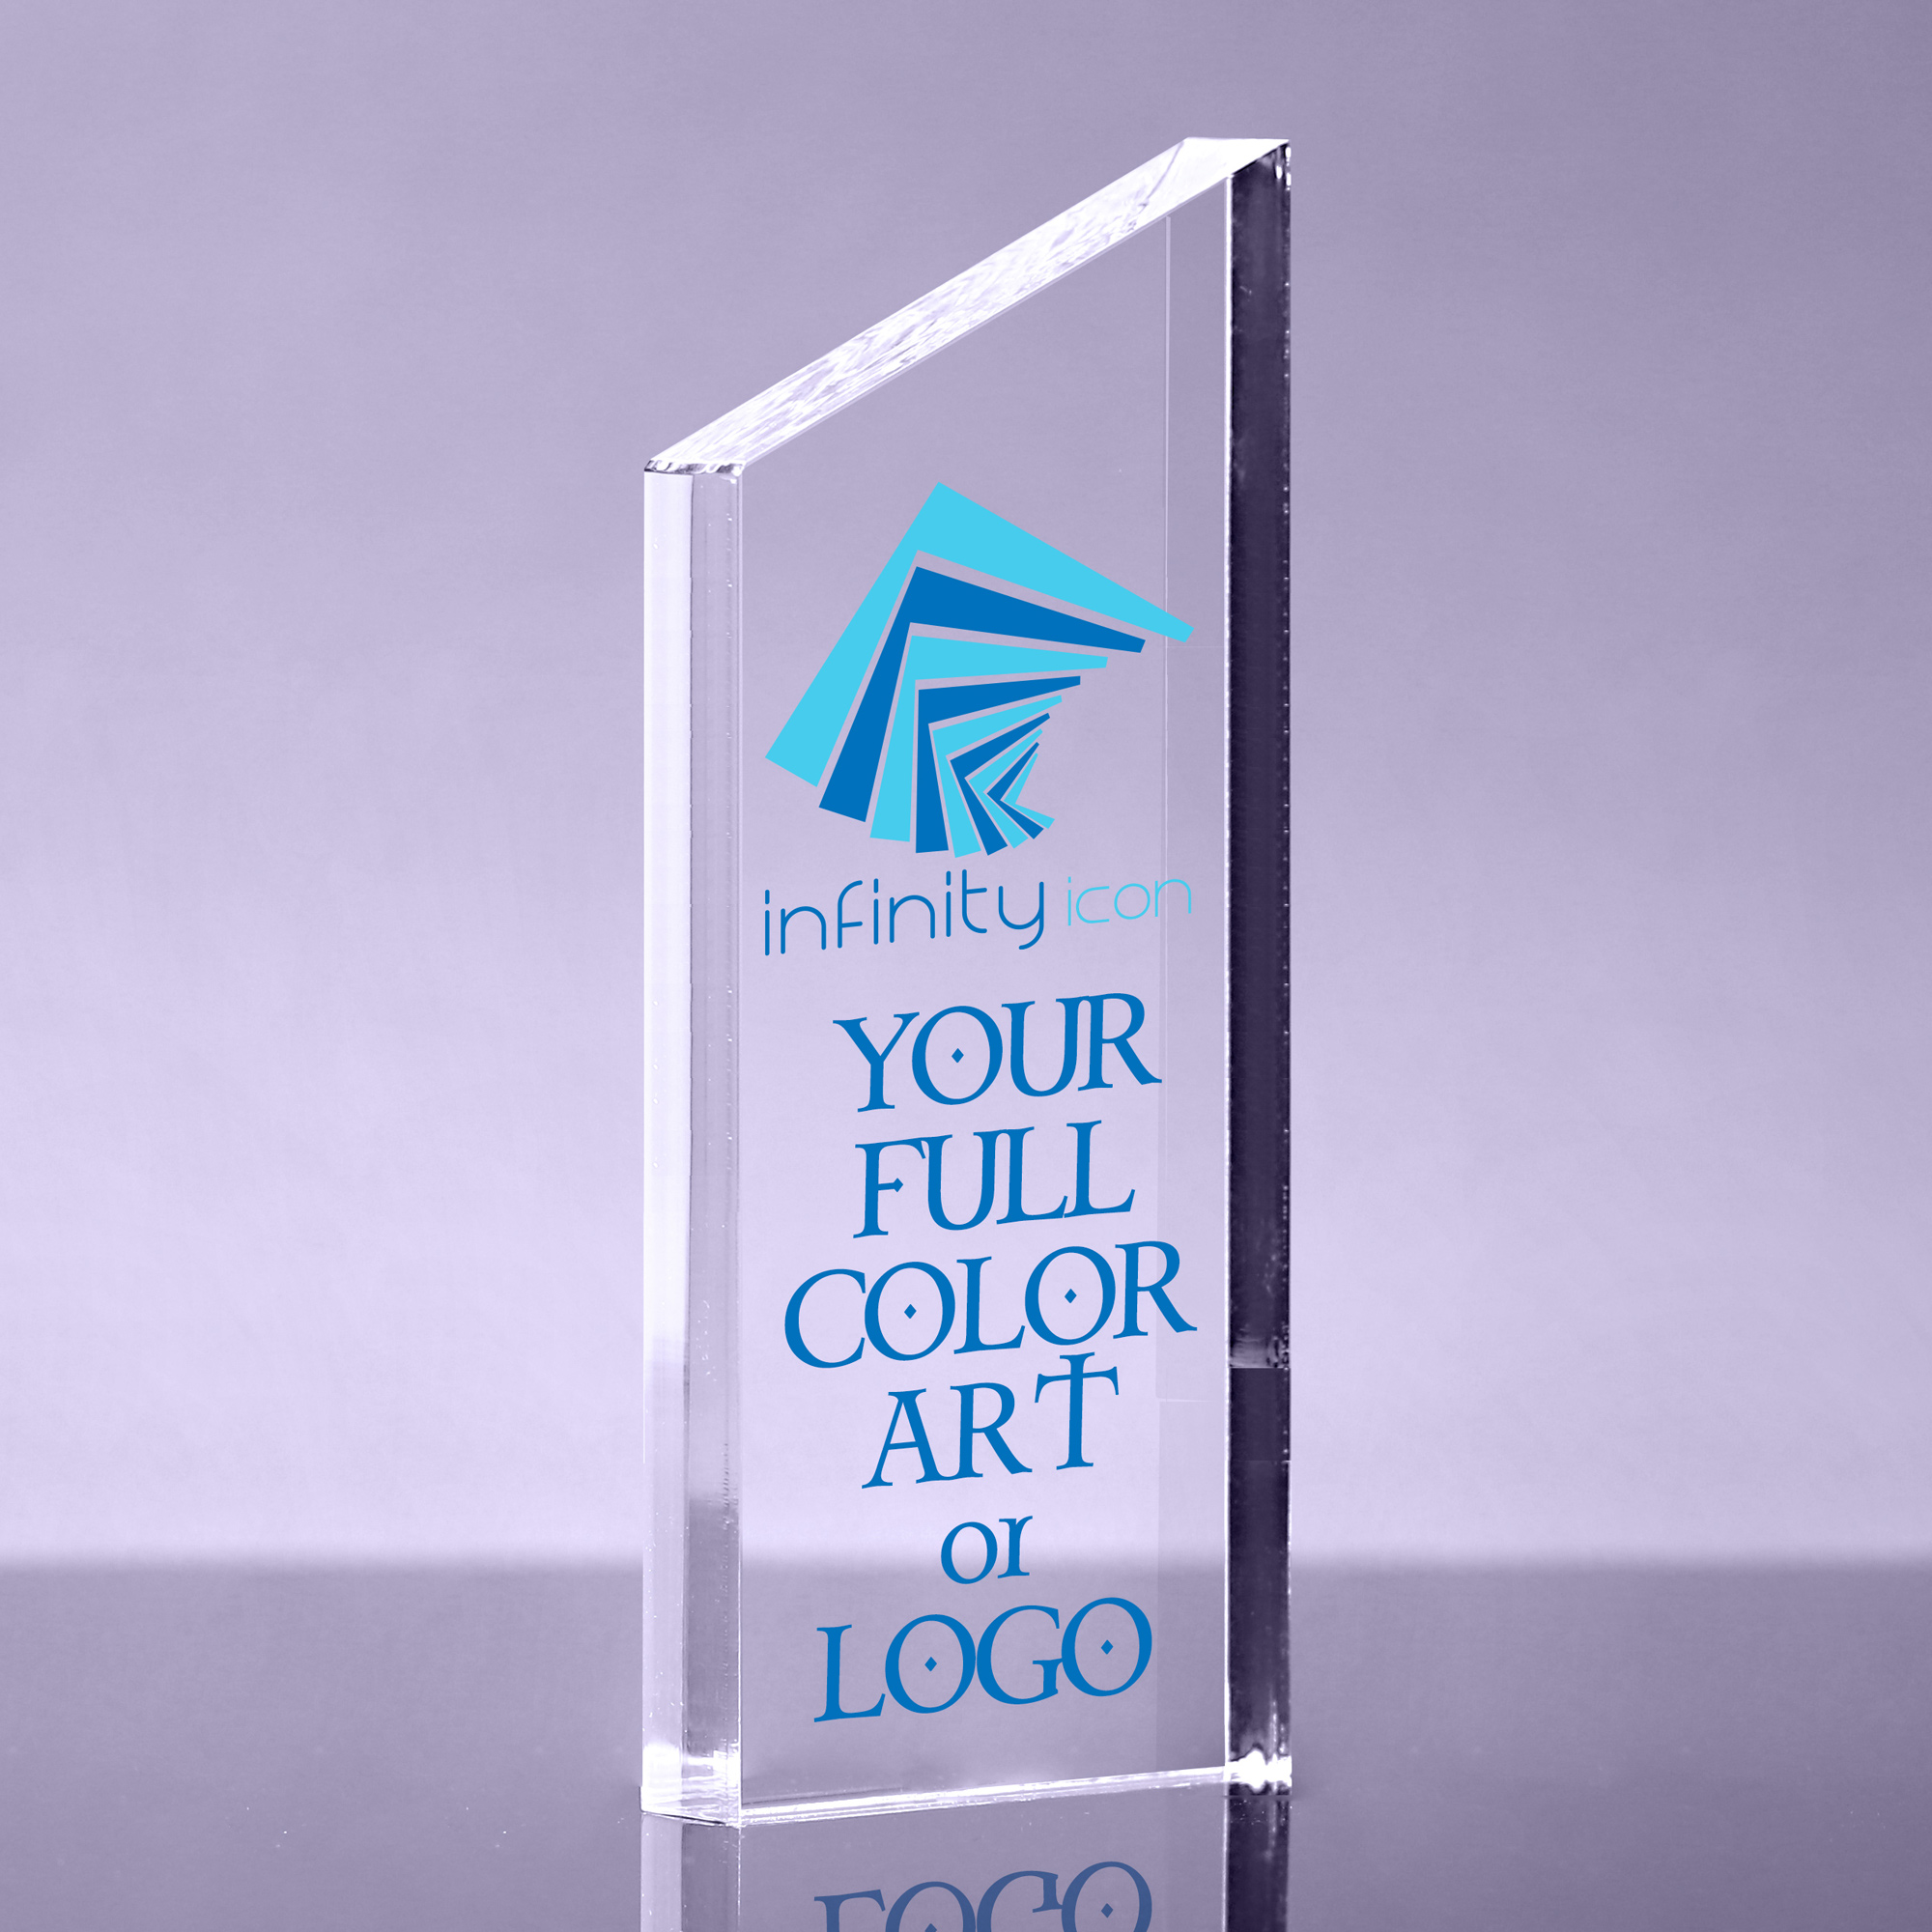 1 inch Thick Acrylic Peak Award - 9 inch Color